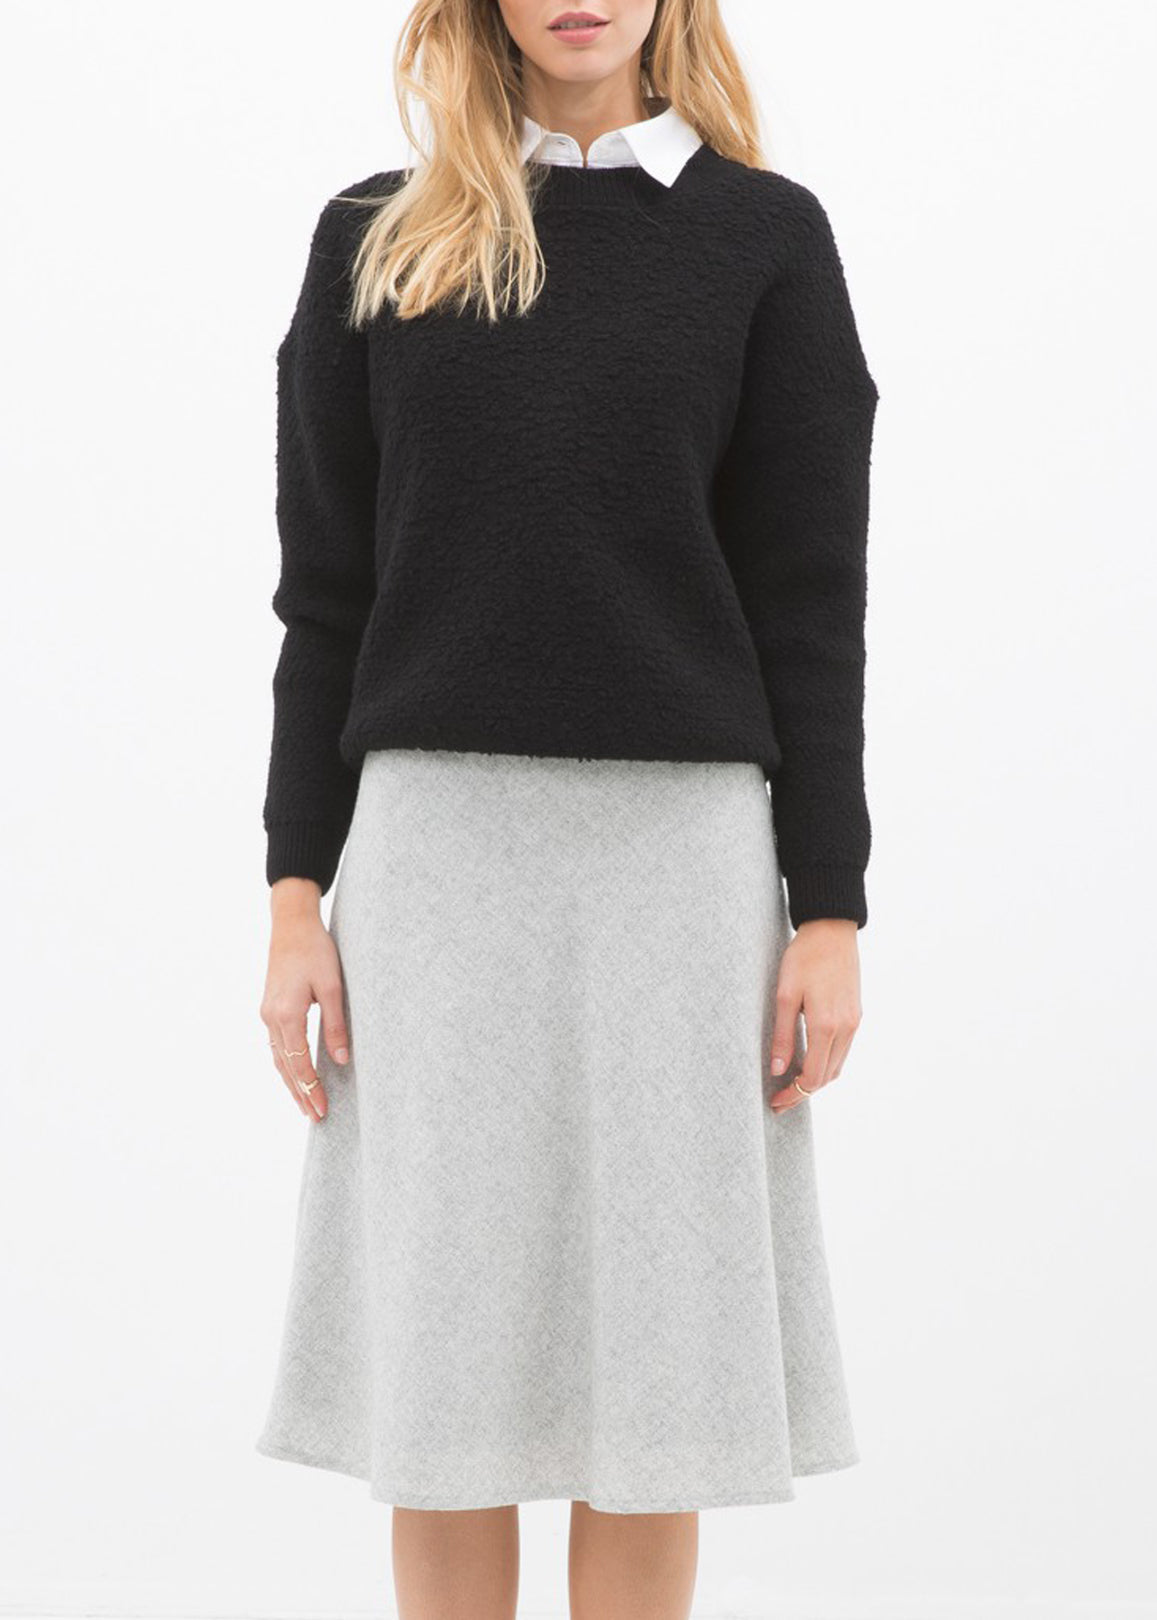 Buy High Waisted Wool Knit Midi Skirt In Heather Grey by Shop at Konus